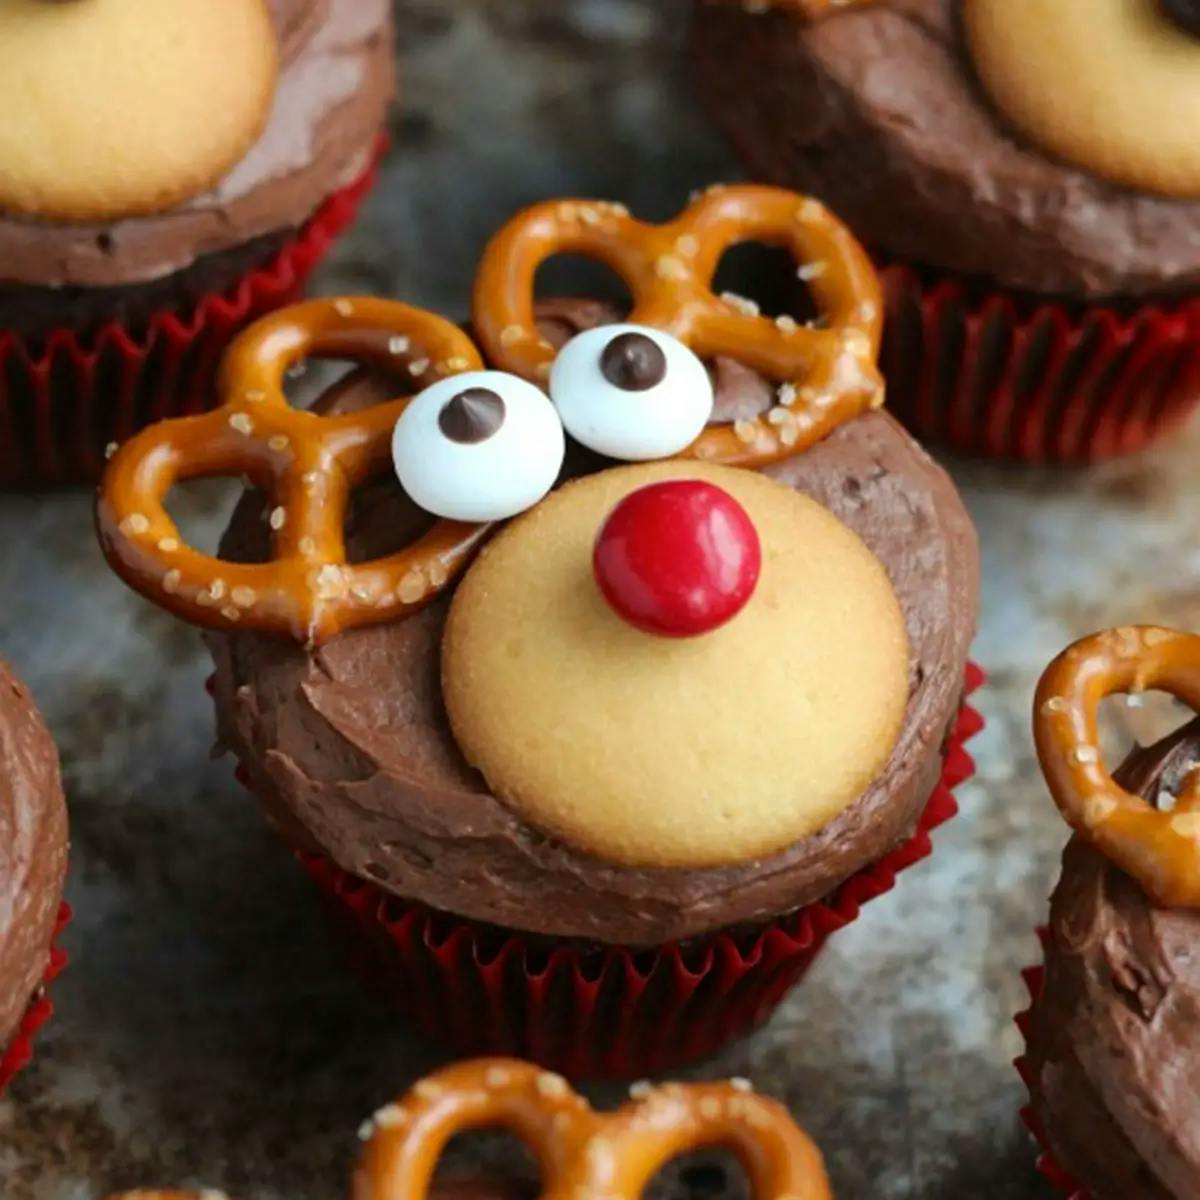 A vanilla cupcake decorated to look like a reindeer, two pretzels as ears, frosting for the eyes, and a red gum ball for the nose.